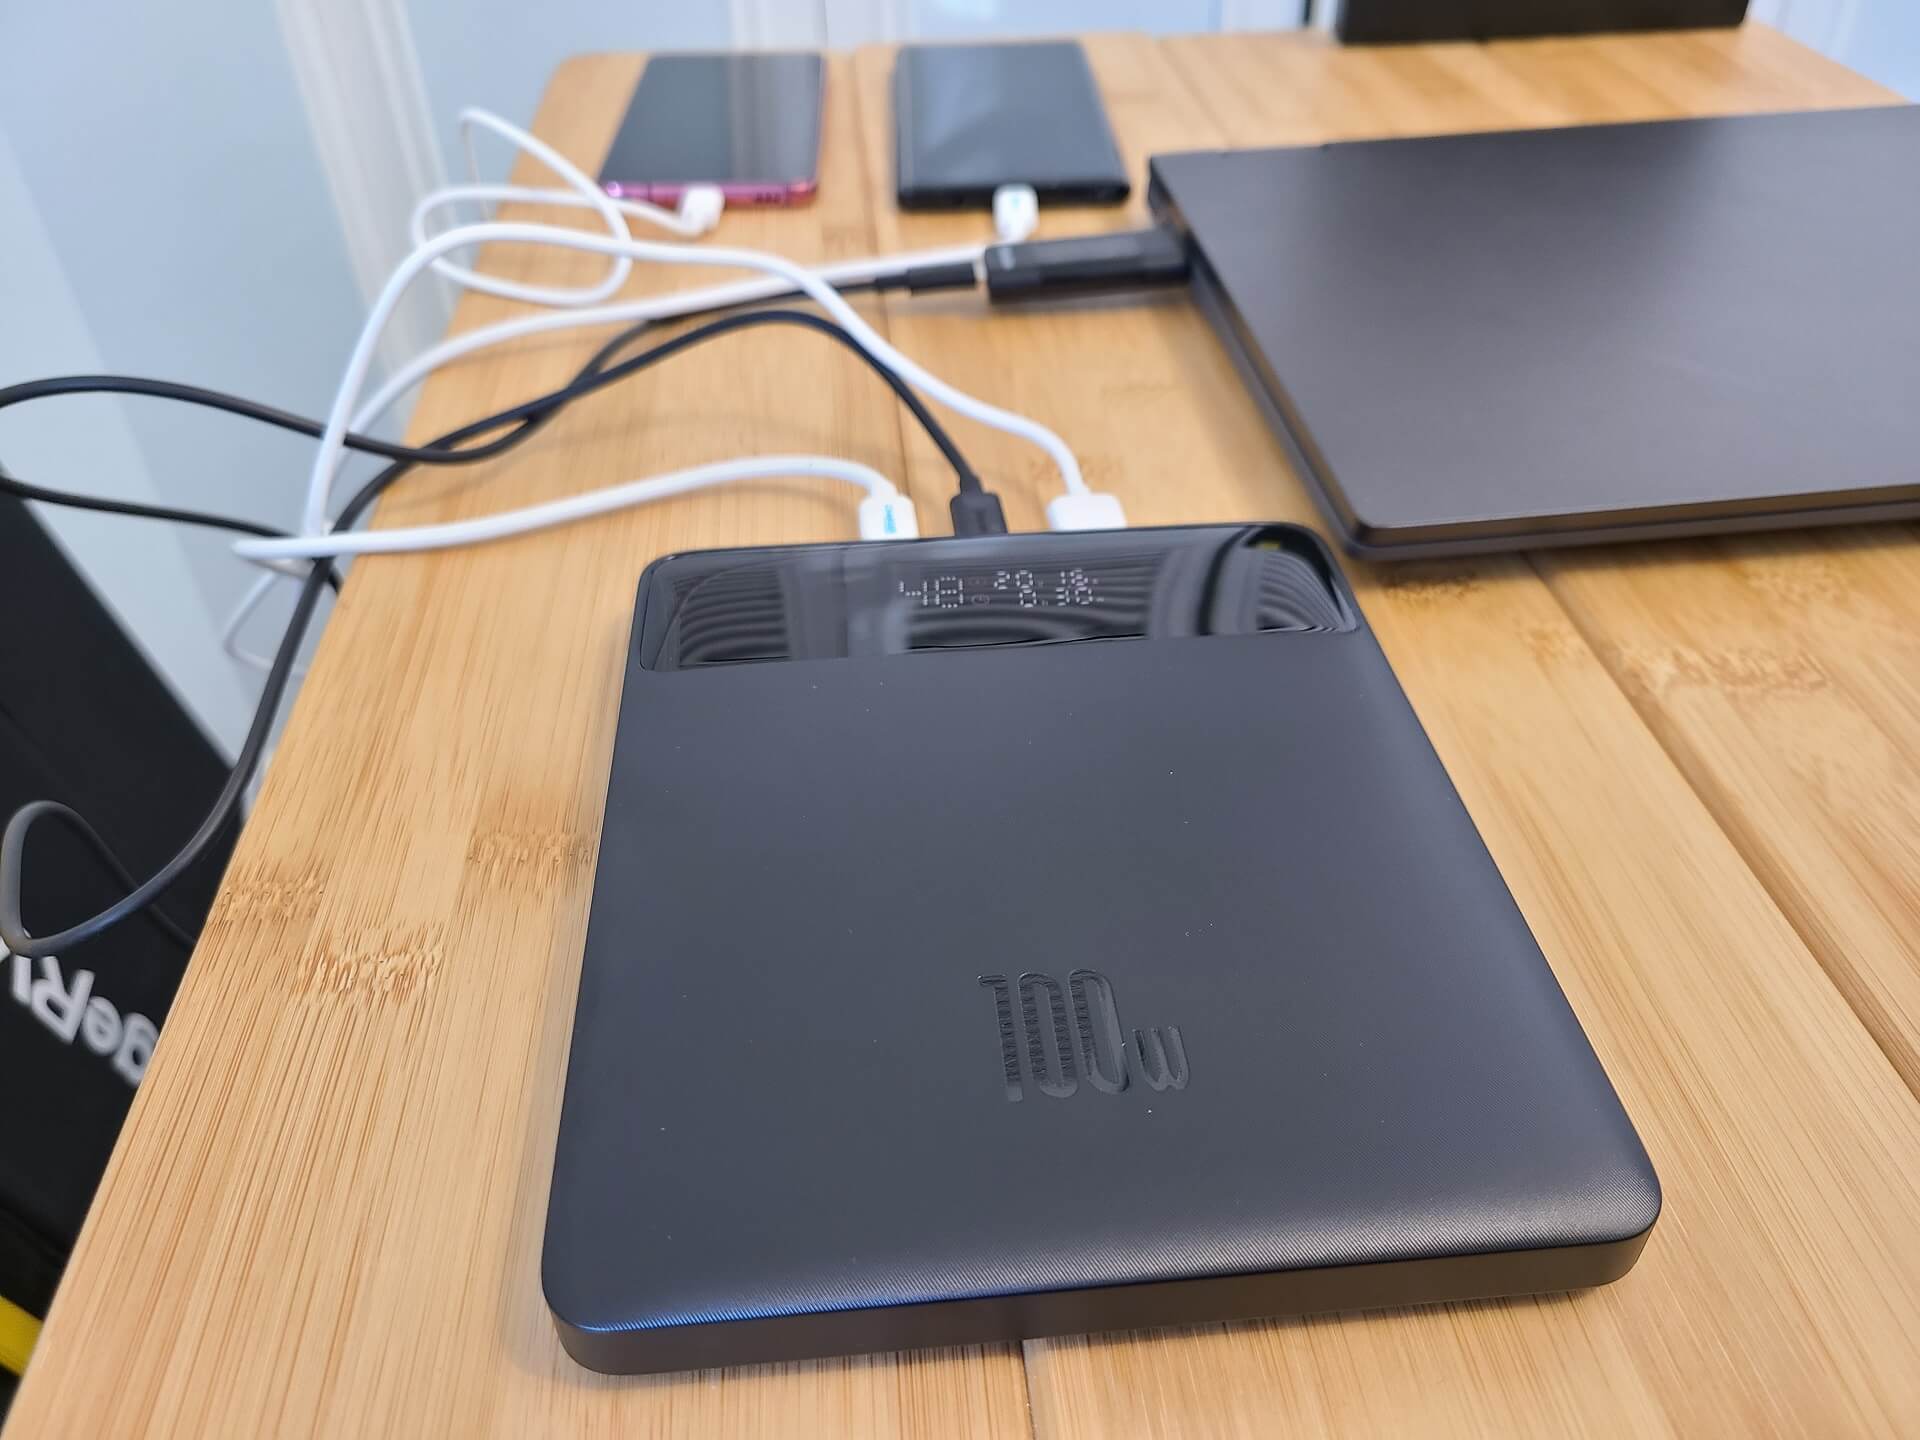 Baseus 100W Power Bank Review: Premium Power and Performance